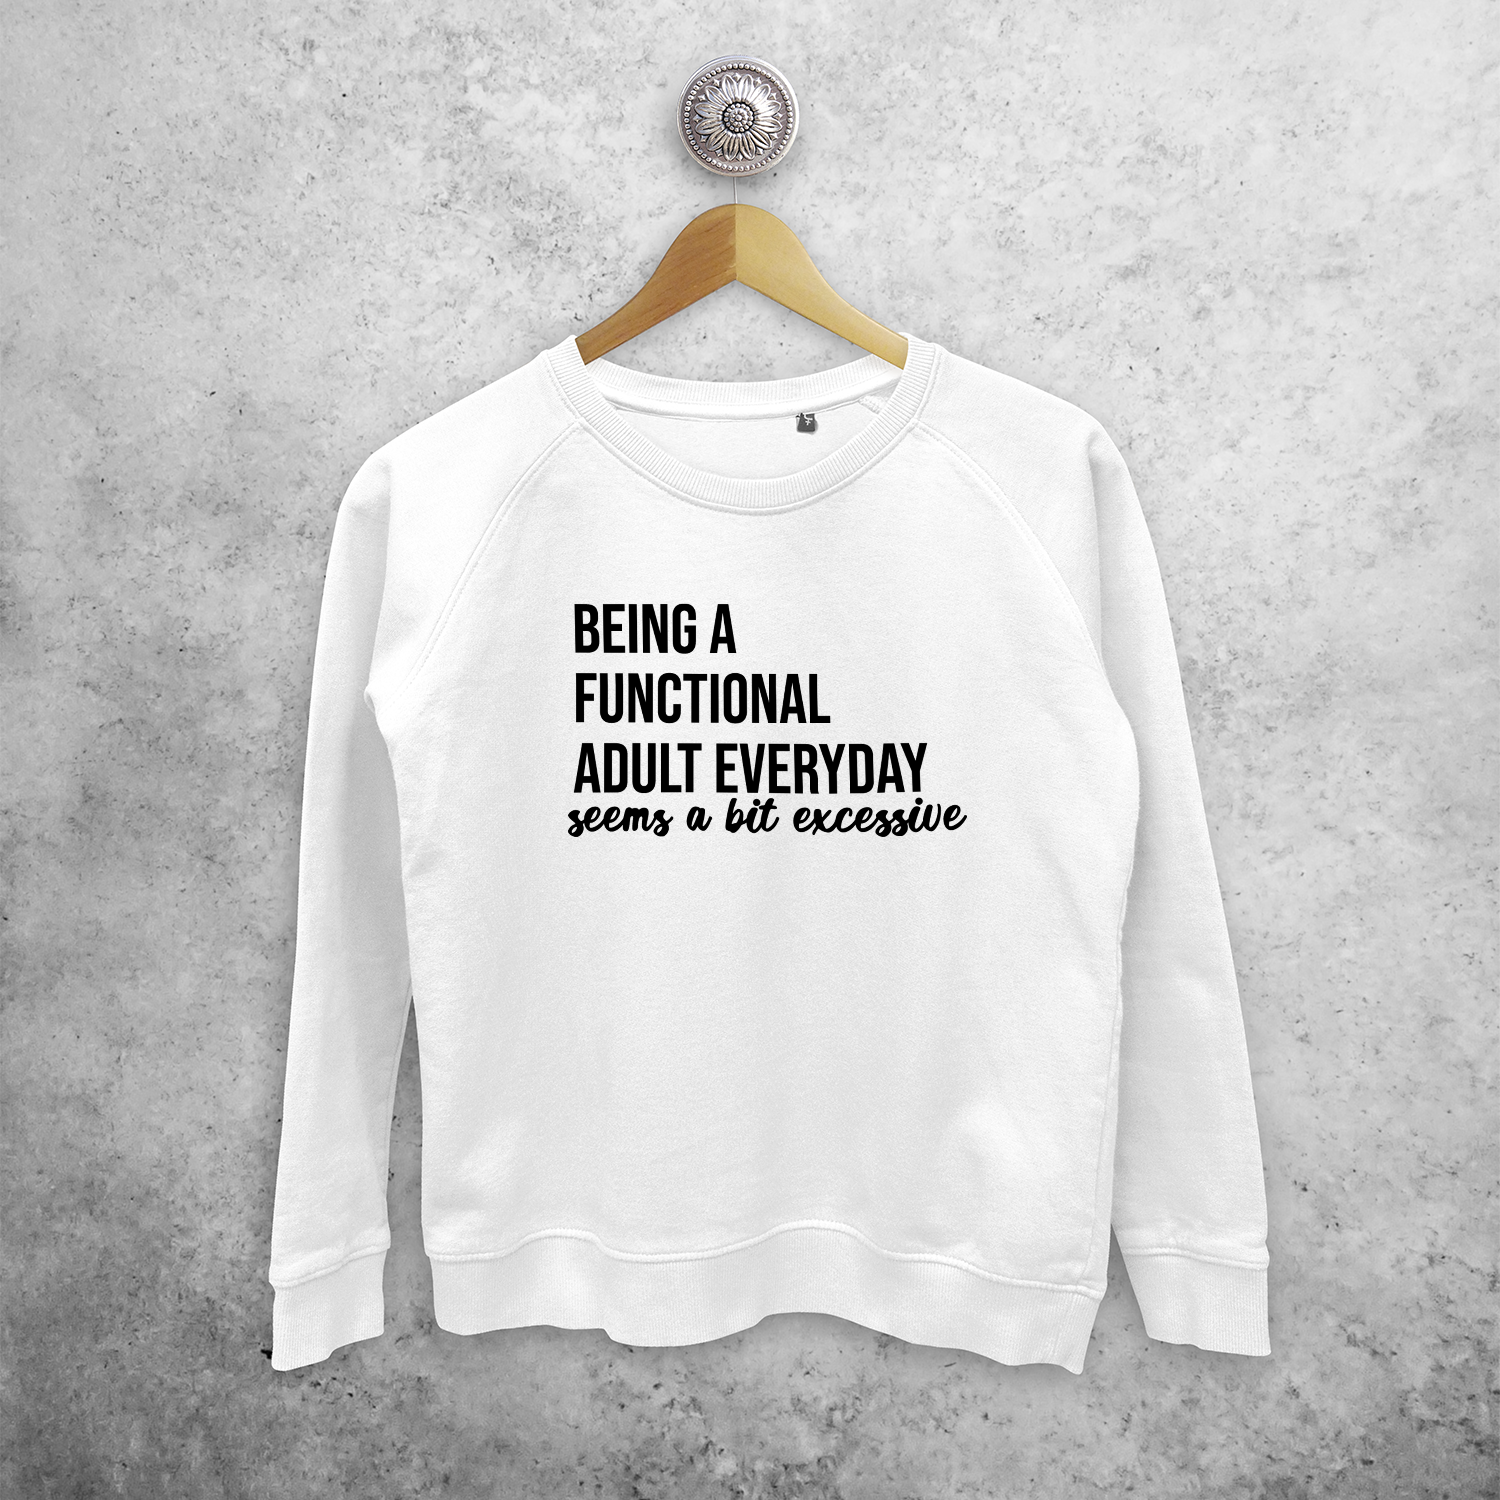 'Being a functional adult everyday seems a bit excessive' sweater